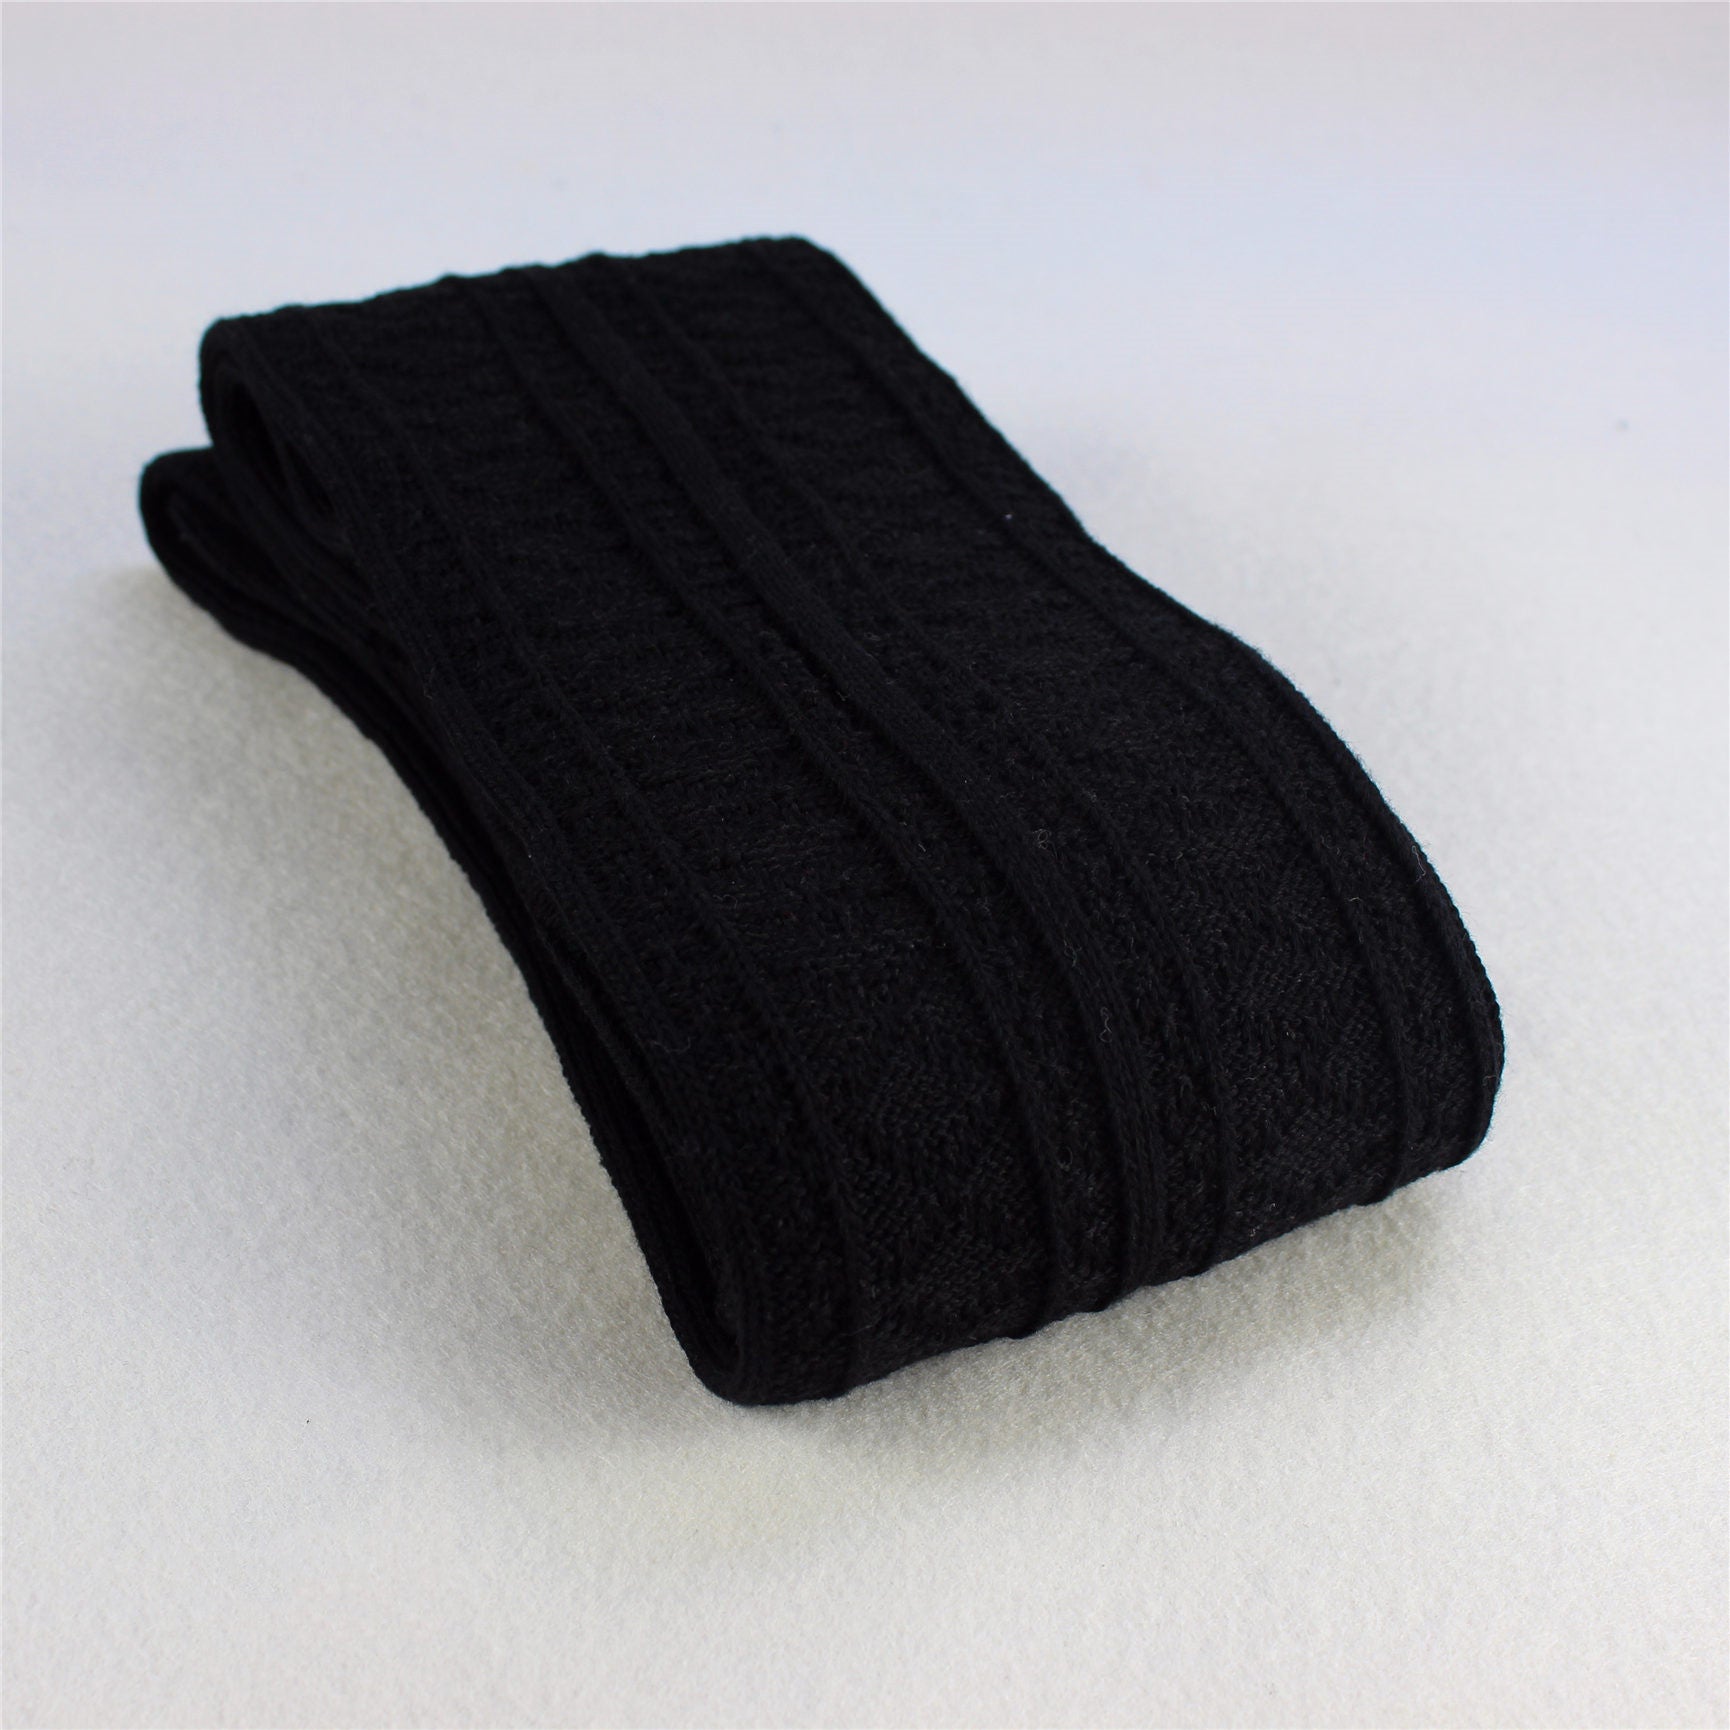 Women's Cotton Socks With Long Twist And Thick Needles Nowena